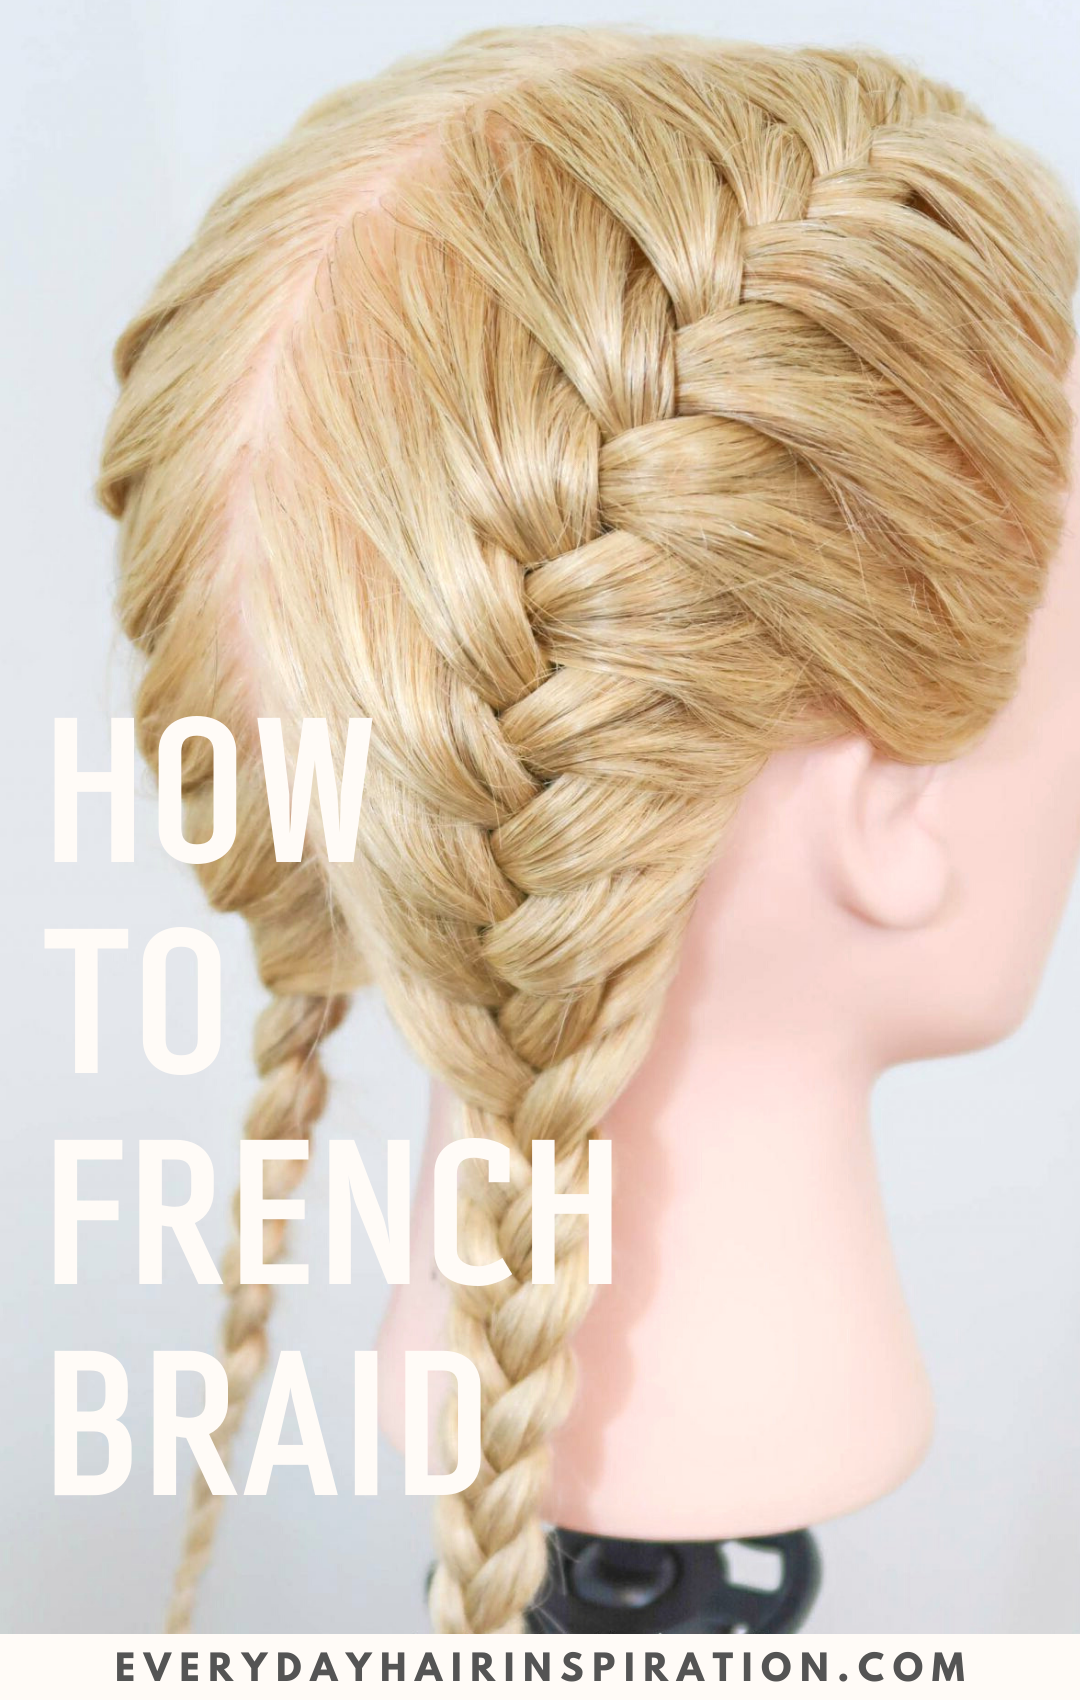 French Braid For Beginners - Easy How To Tutorial - Everyday